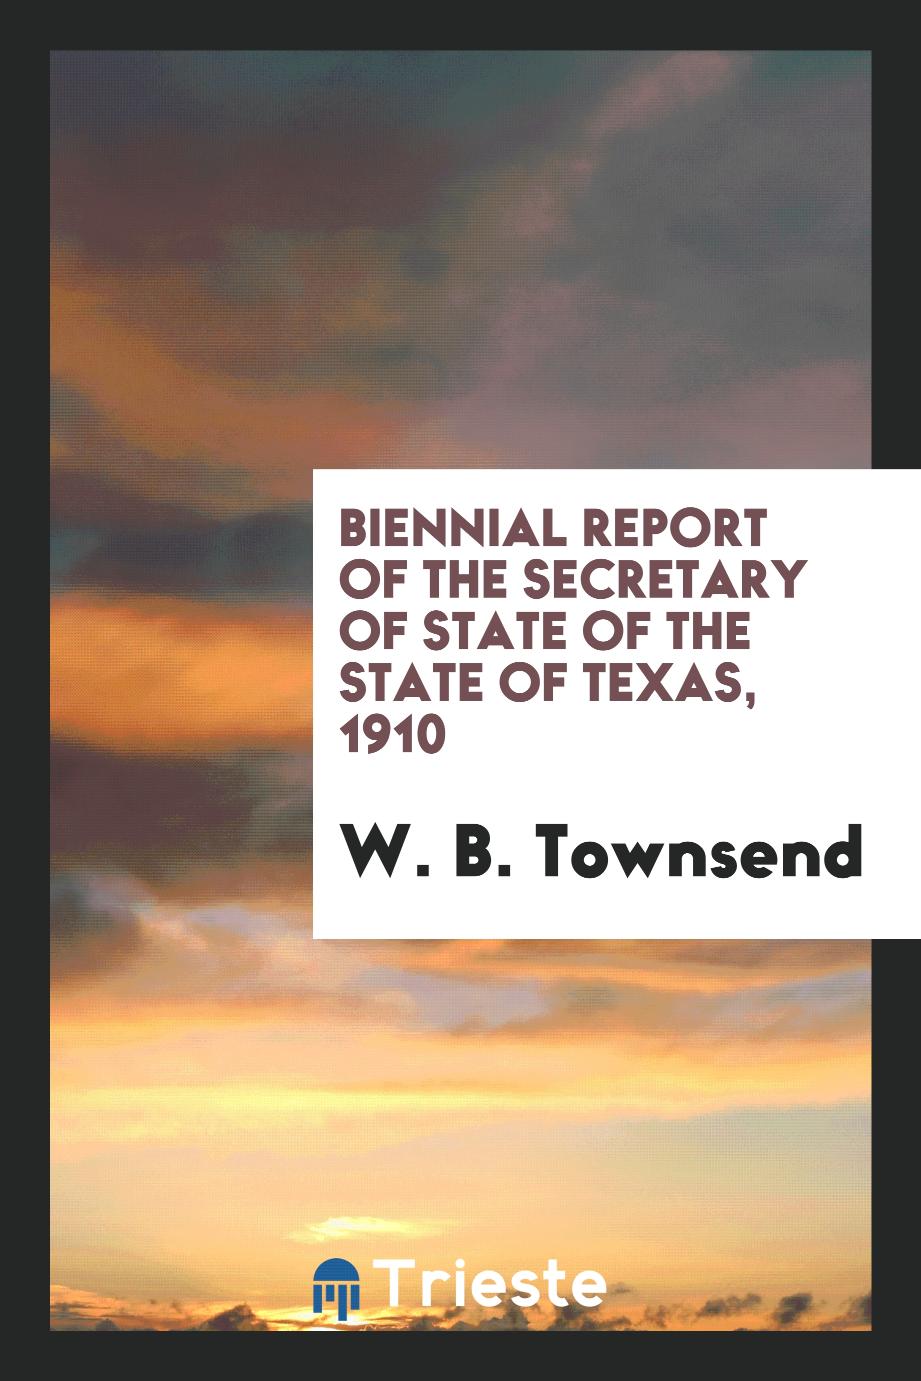 Biennial Report of the Secretary of State of the State of Texas, 1910